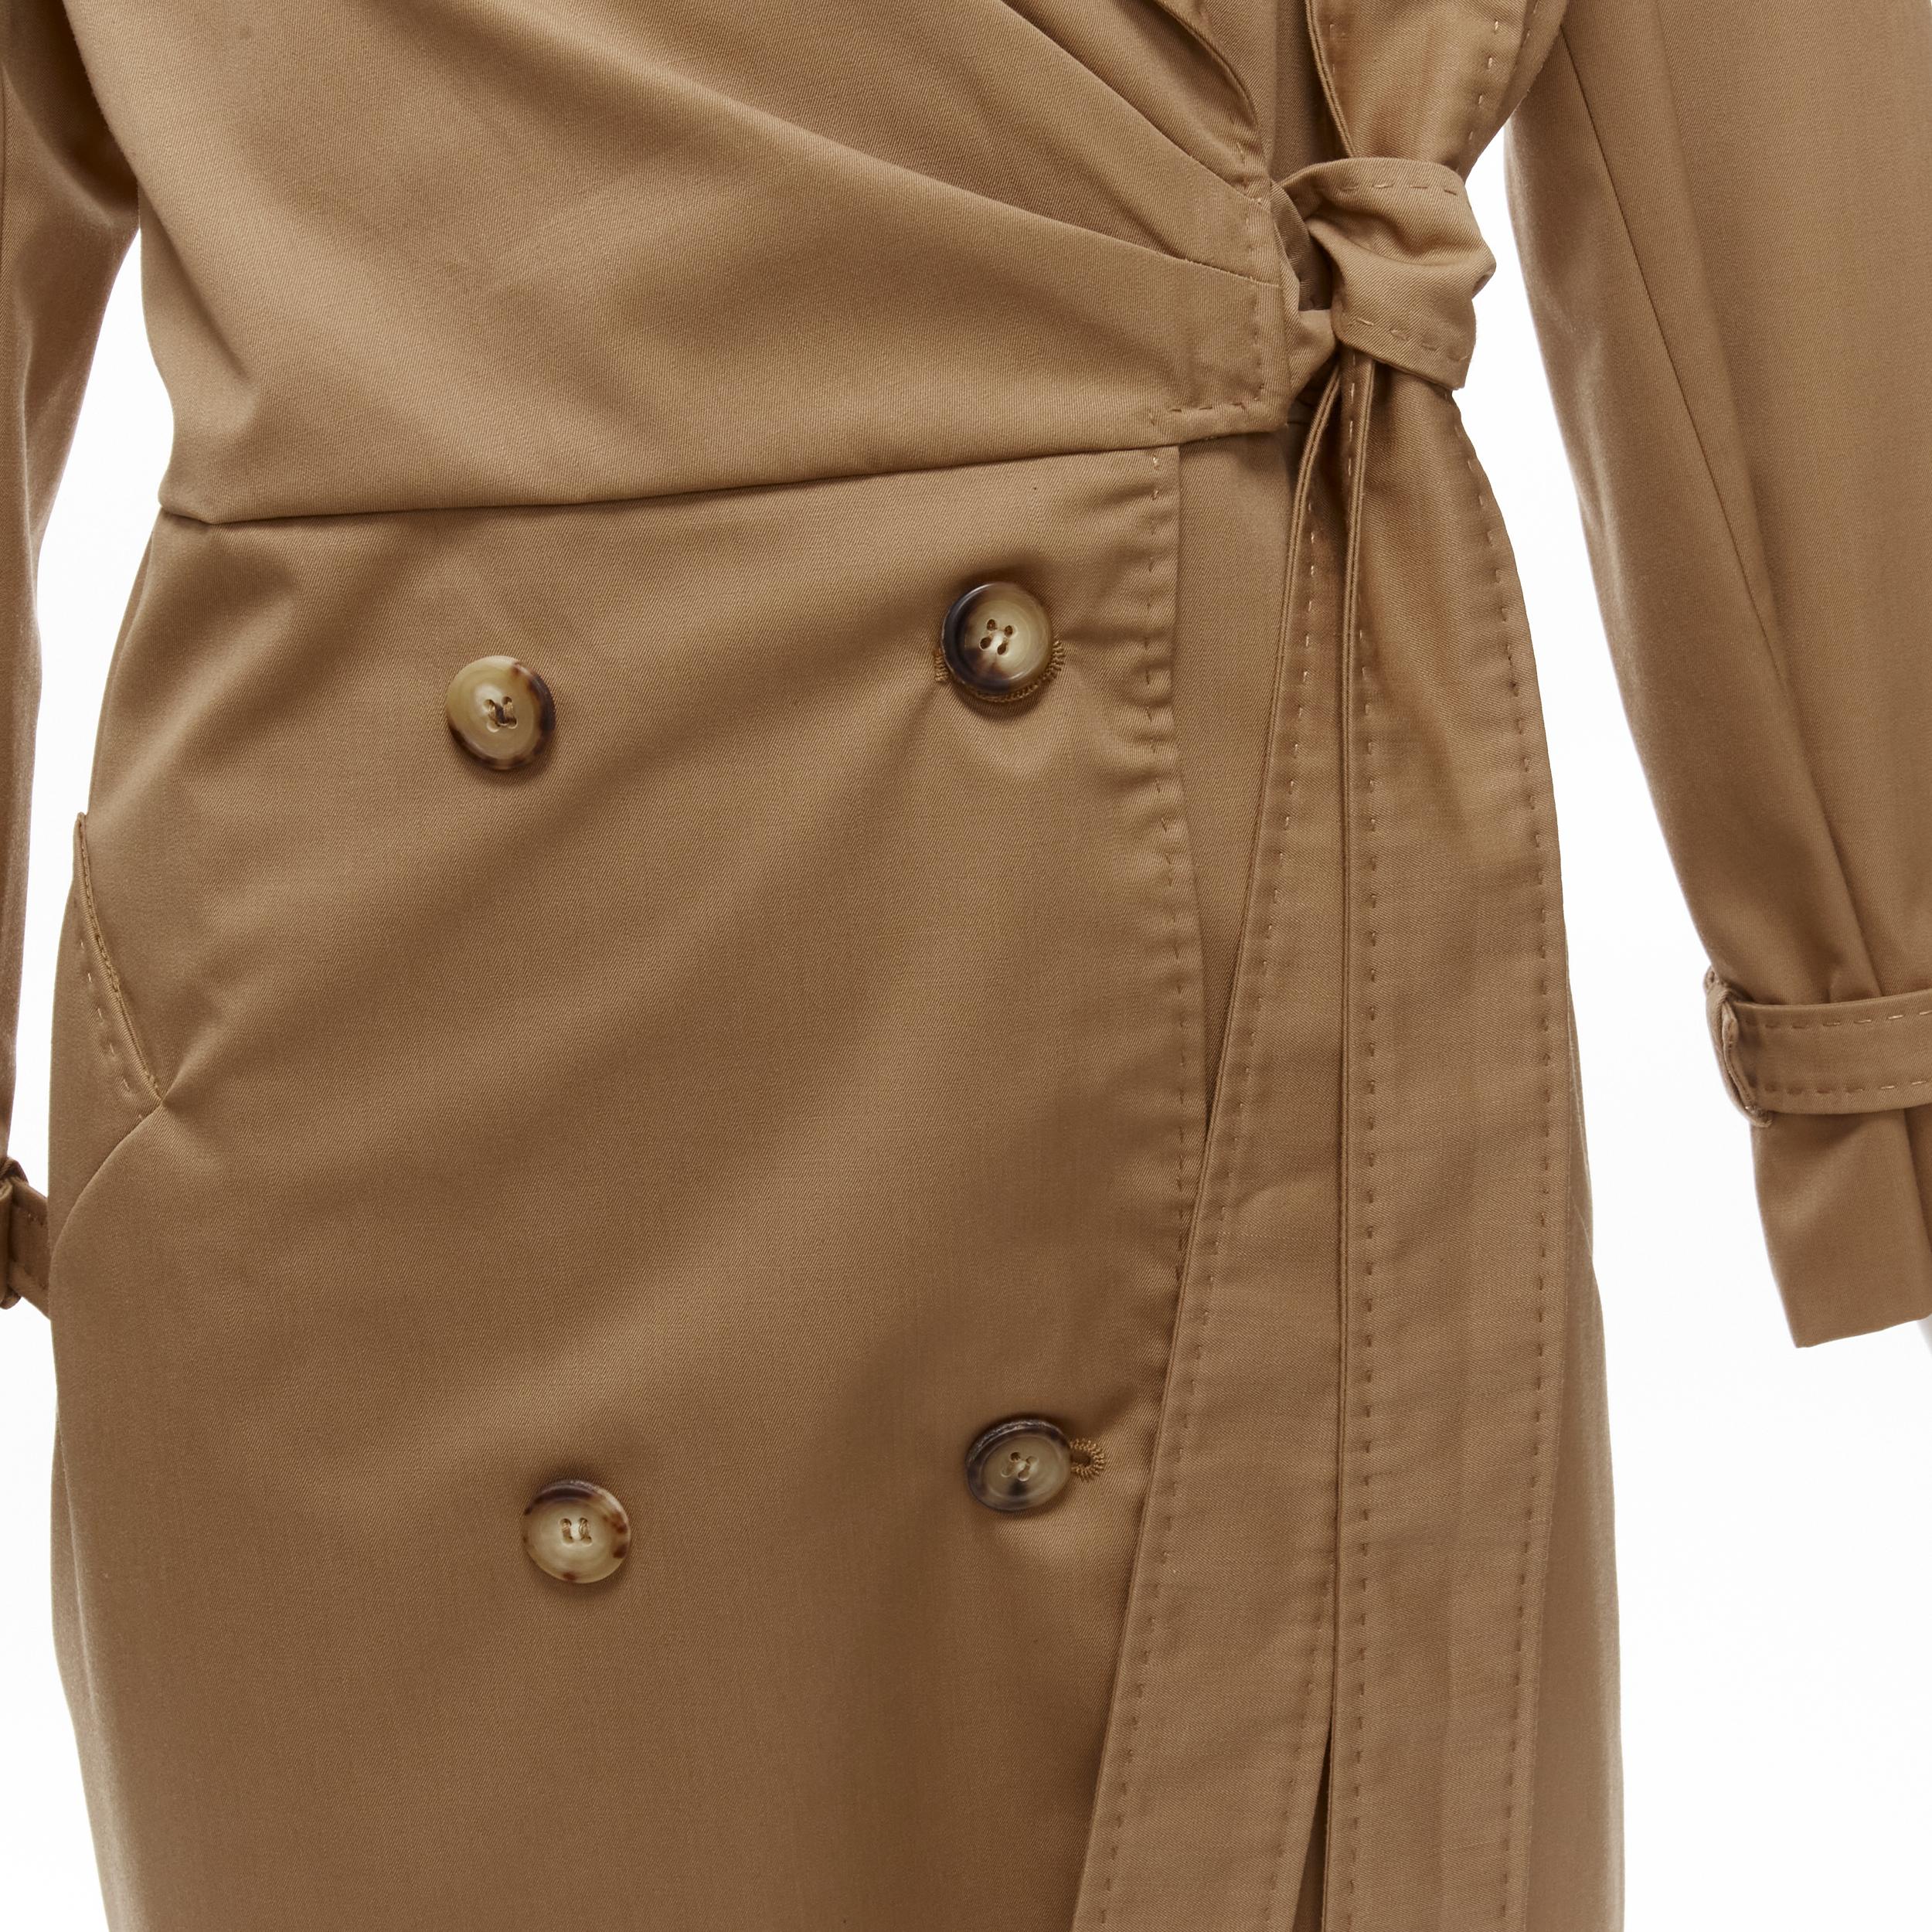 MAX MARA 100% virgin wool tan wrap tie trench coat dress IT42 M
Reference: TGAS/D00281
Brand: Max Mara
Material: Virgin Wool
Color: Tan Brown
Pattern: Solid
Closure: Wrap Tie
Lining: Khaki Fabric
Extra Details: Wrap tie and buttons closure. Fitted